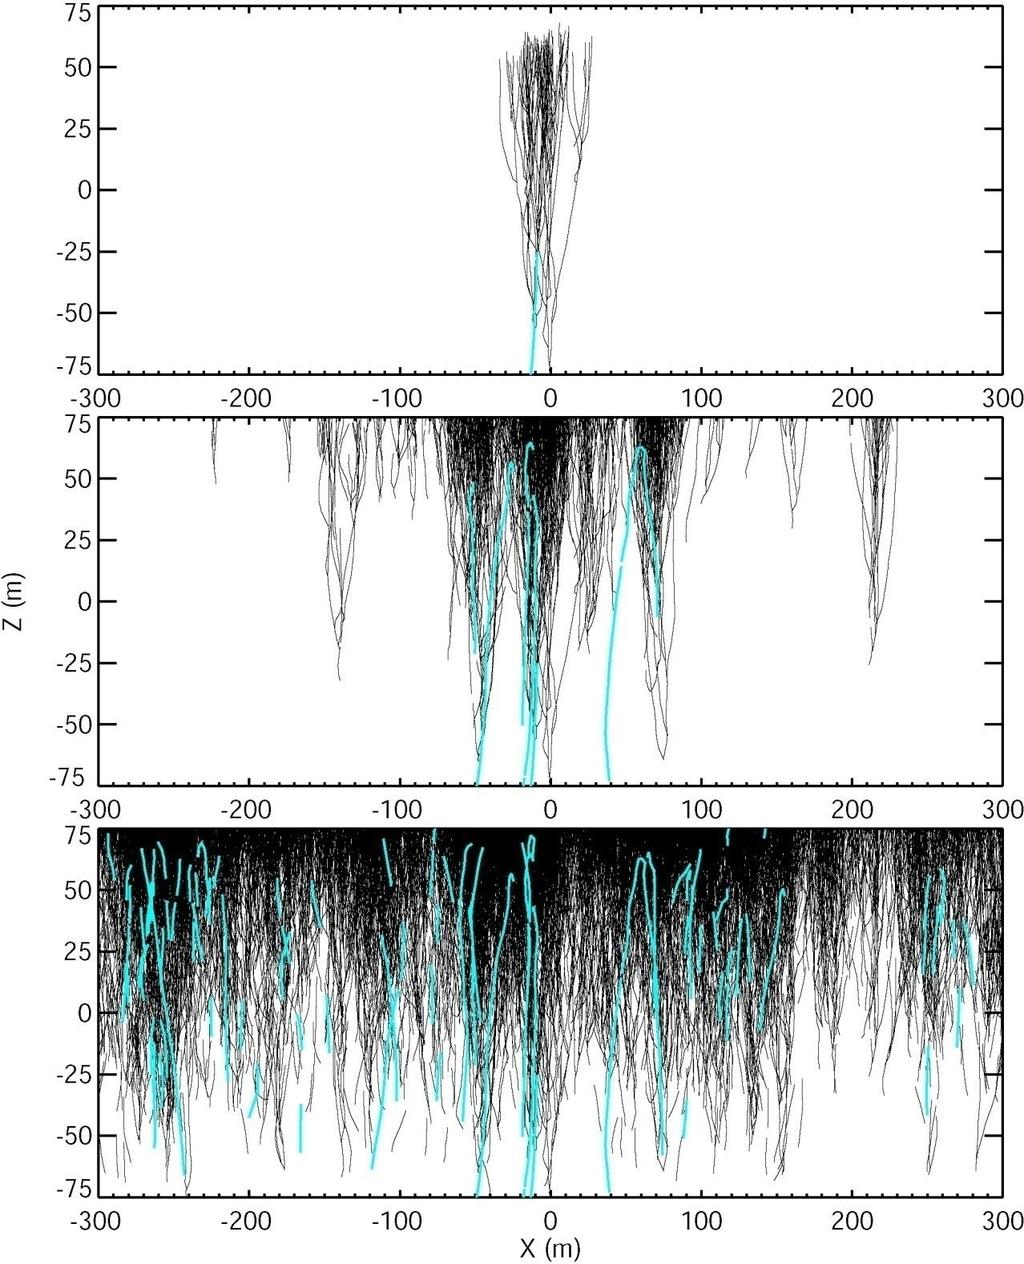 Relativistic feedback discharge (RFD) aka Dark Lightning due to x-rays and positrons. The central avalanche is due to the injection of a single, 1 MeV seed electron.